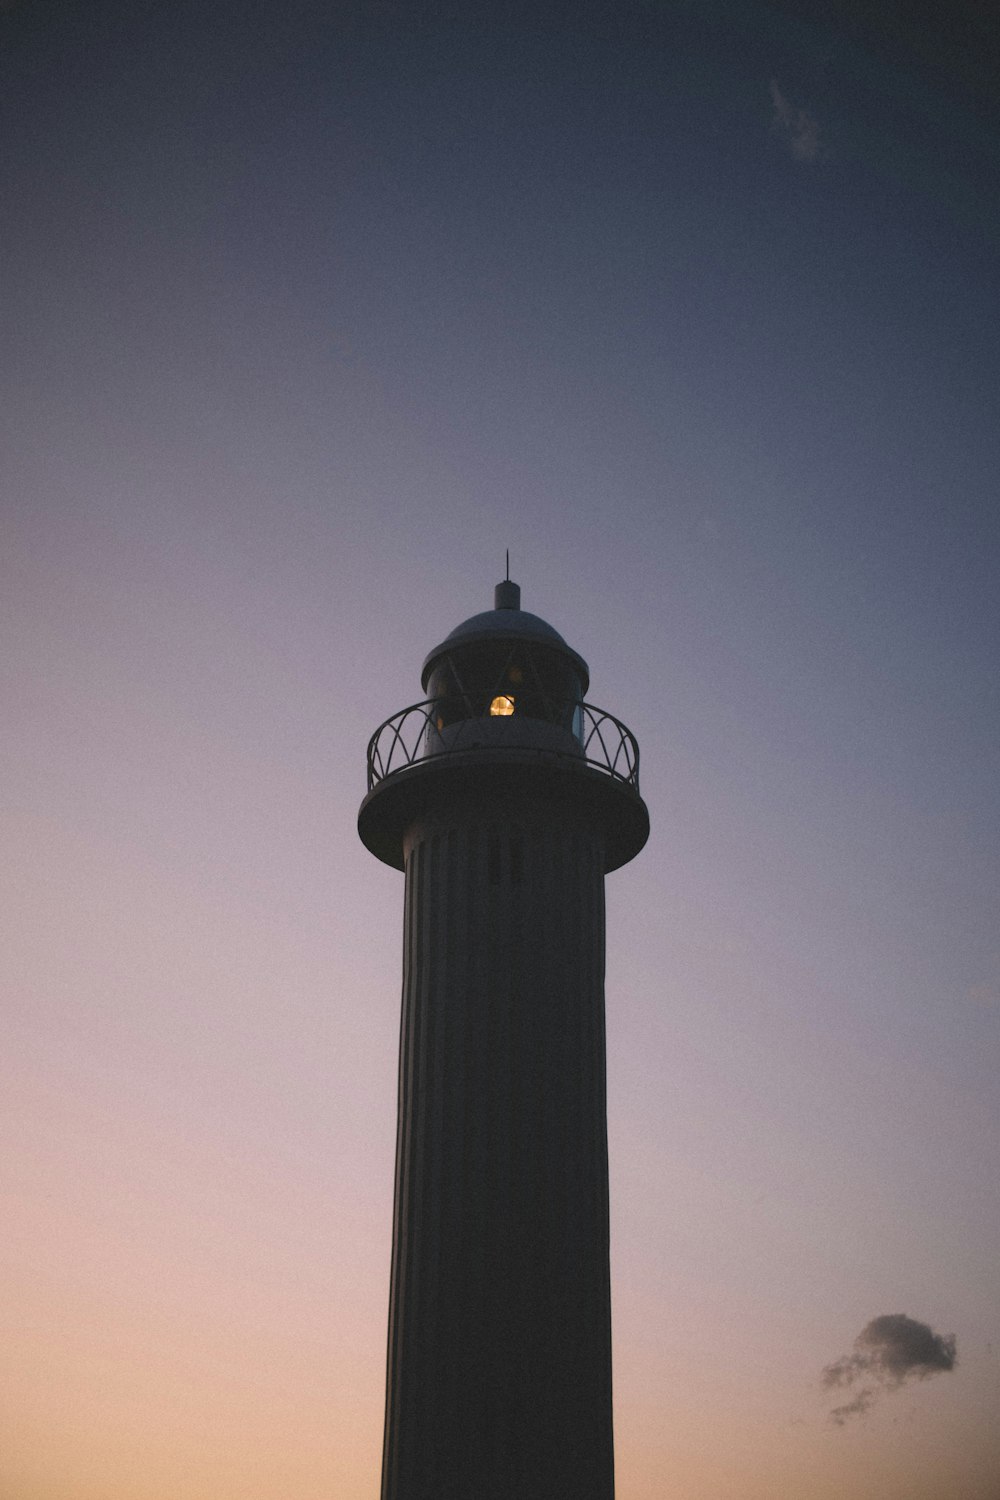 lighthouse during golden hour